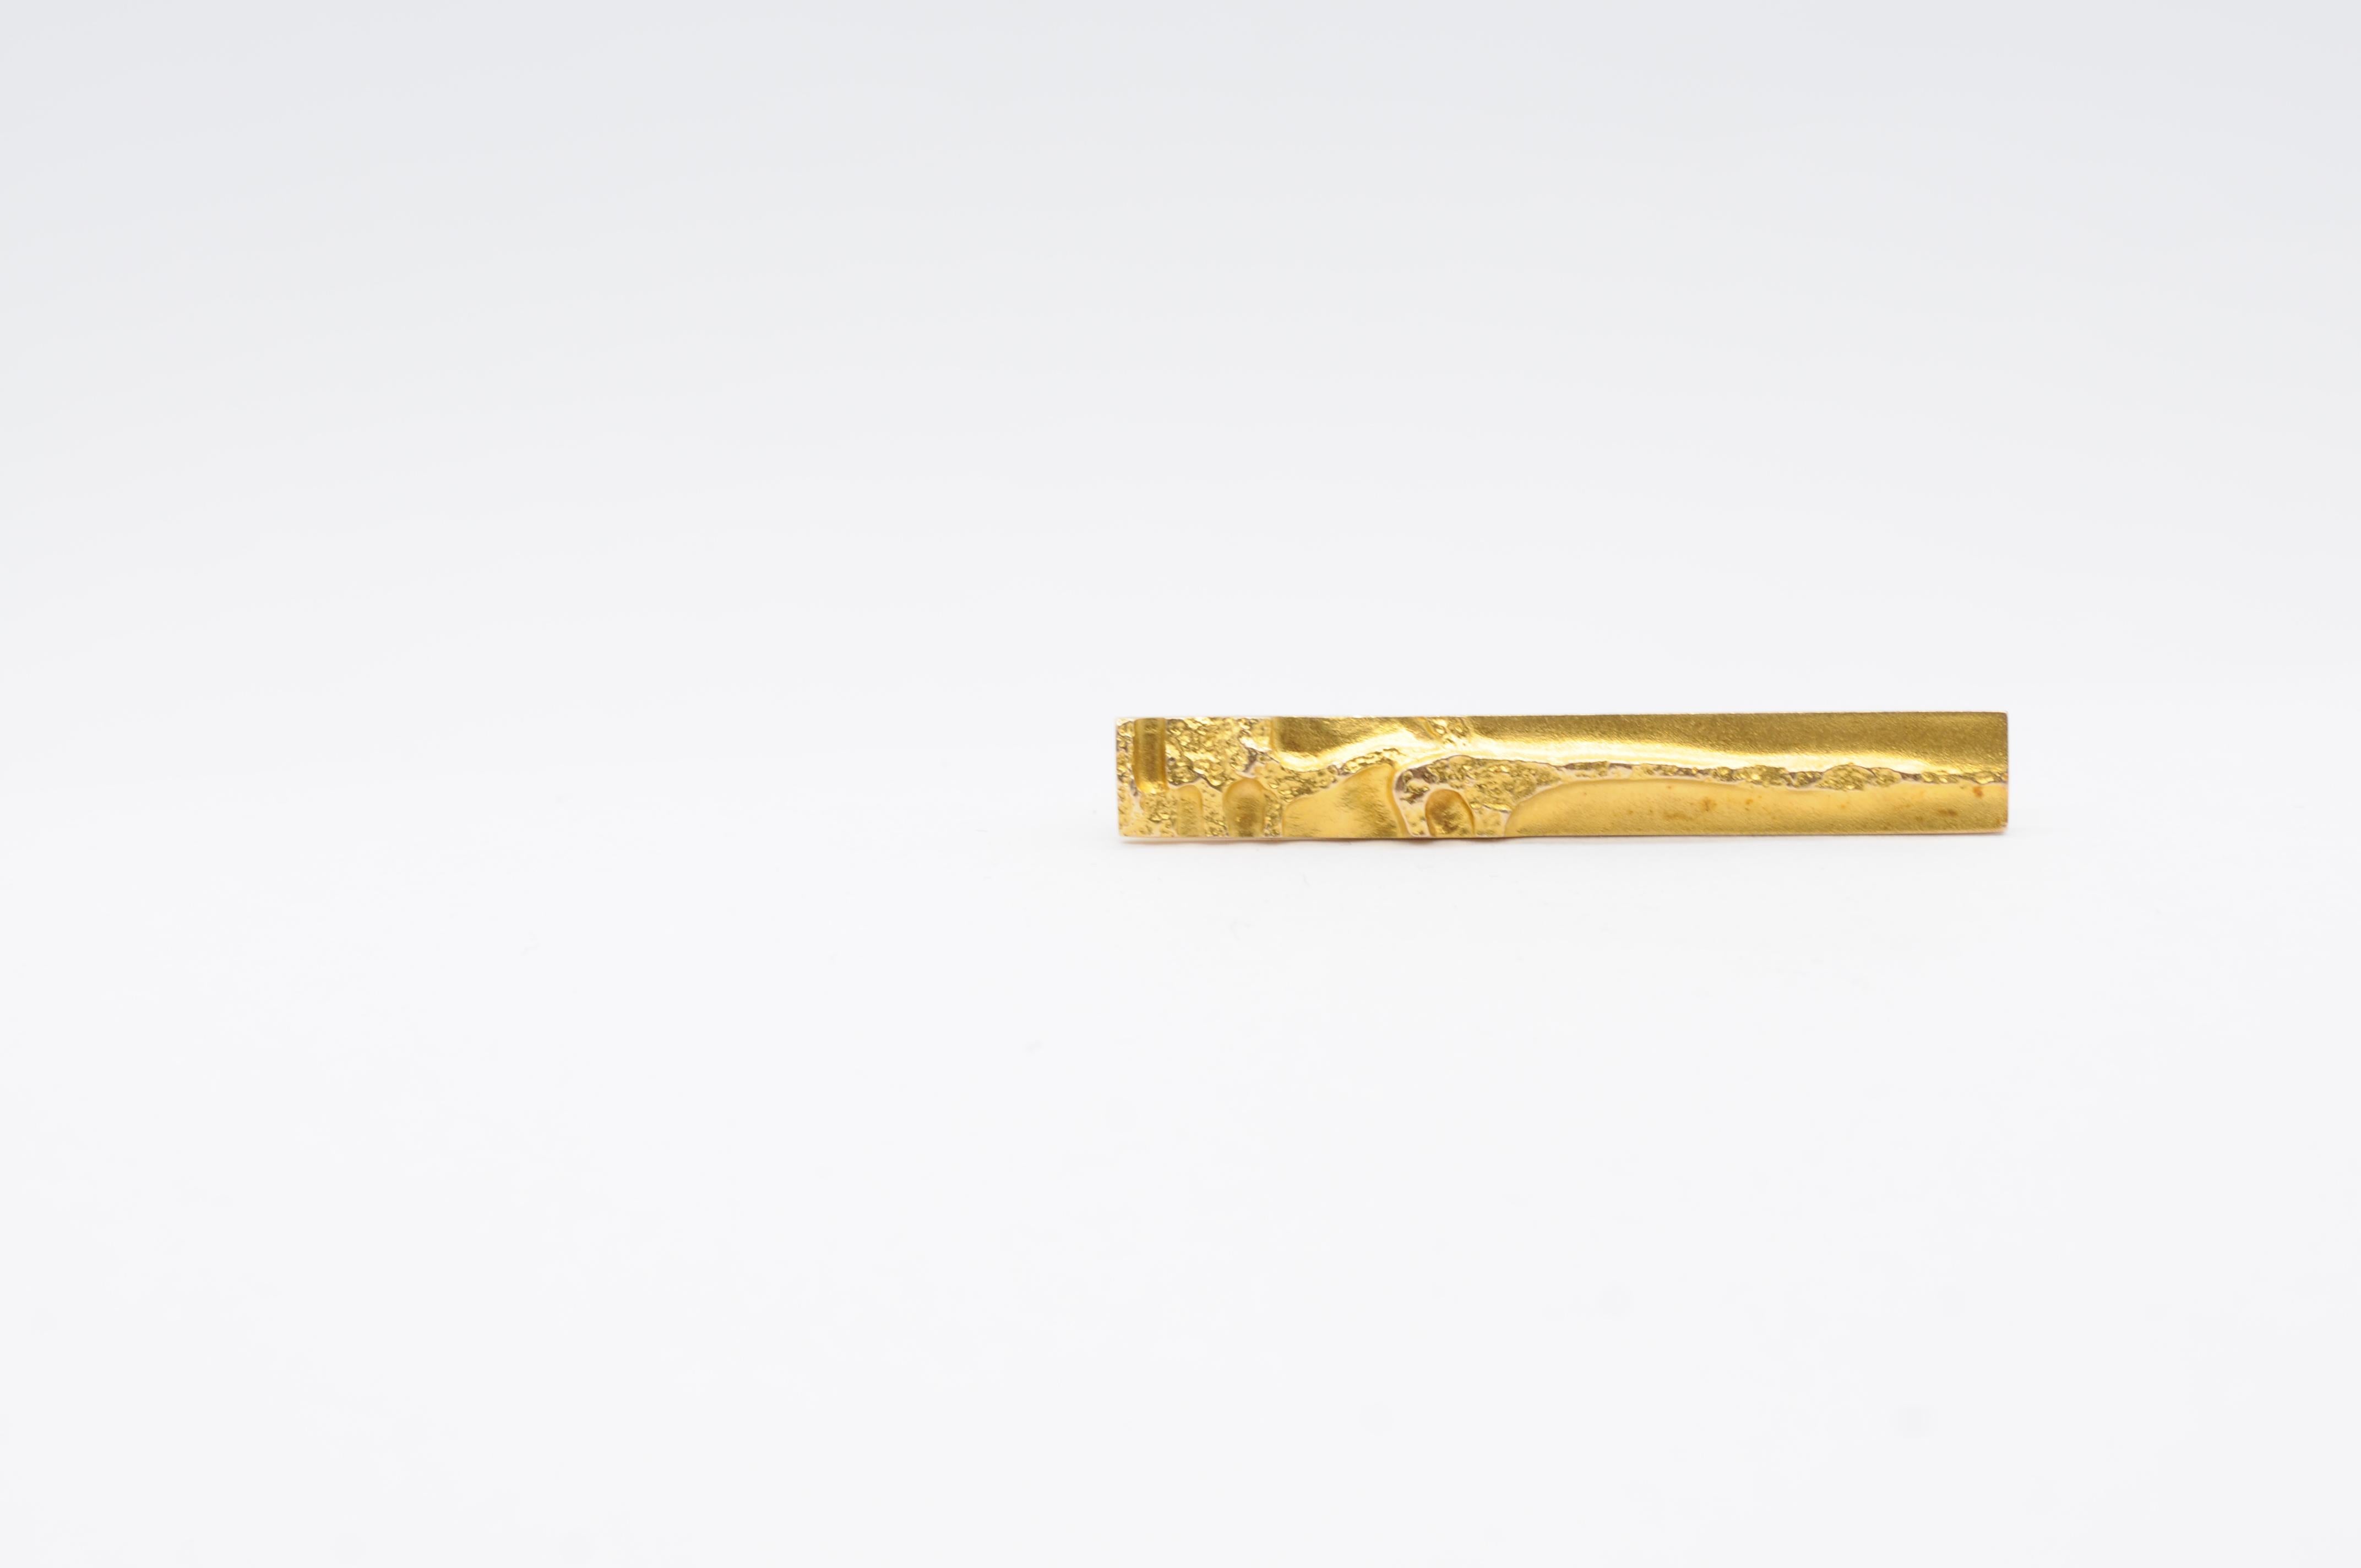 Aesthetic Movement Lapponia tie clip from Finland 18k yellow gold For Sale